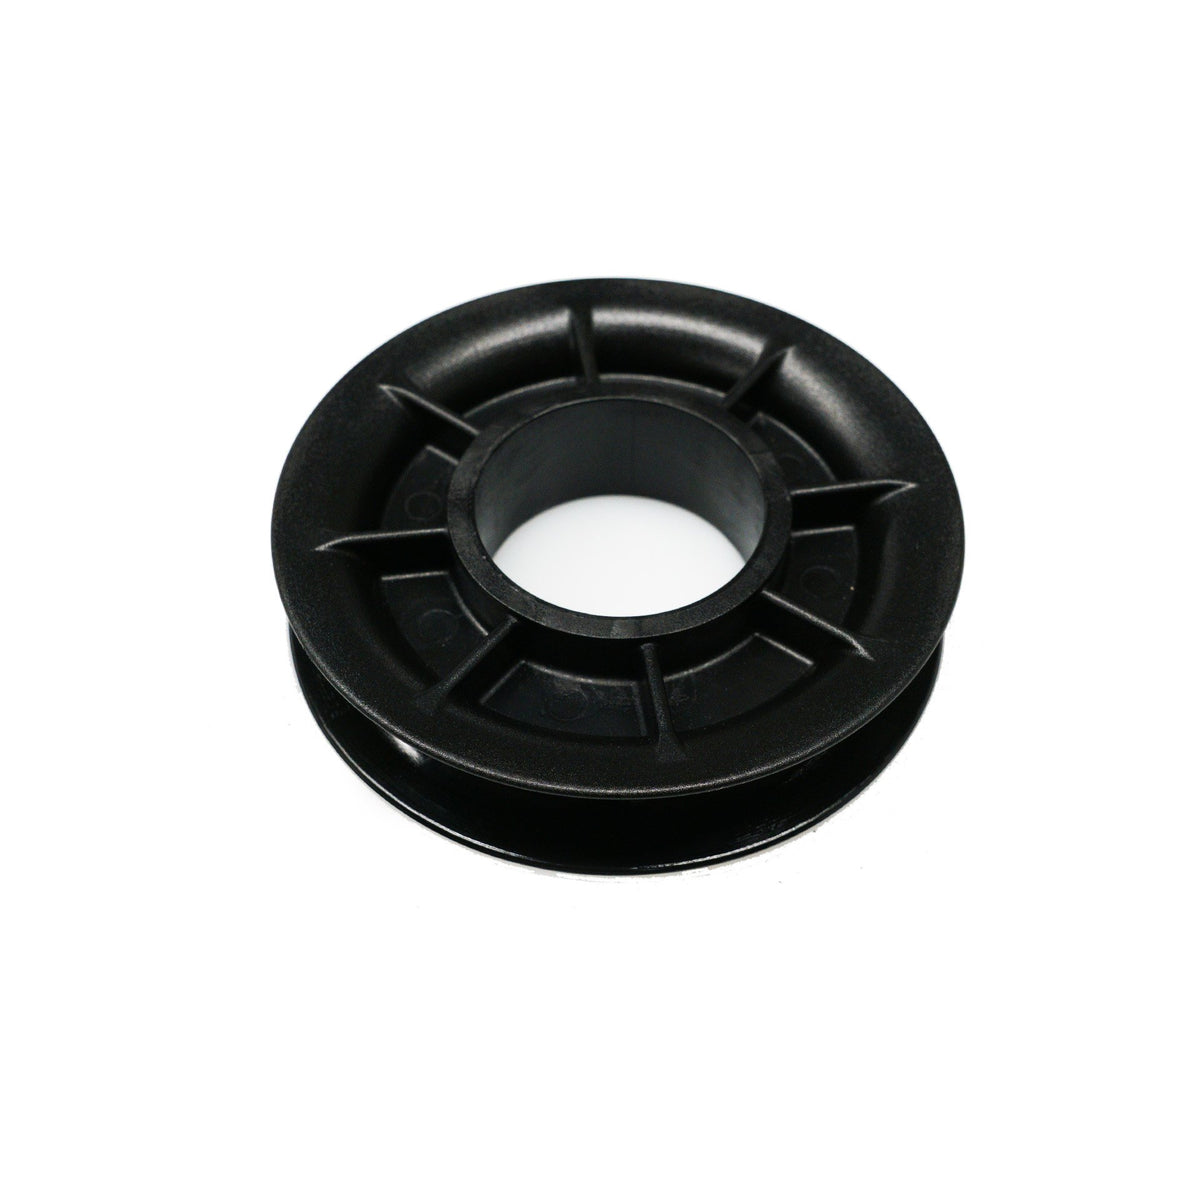 Replacement Hose Sheave | Forklift Parts| Buy Online - HOJ Innovations